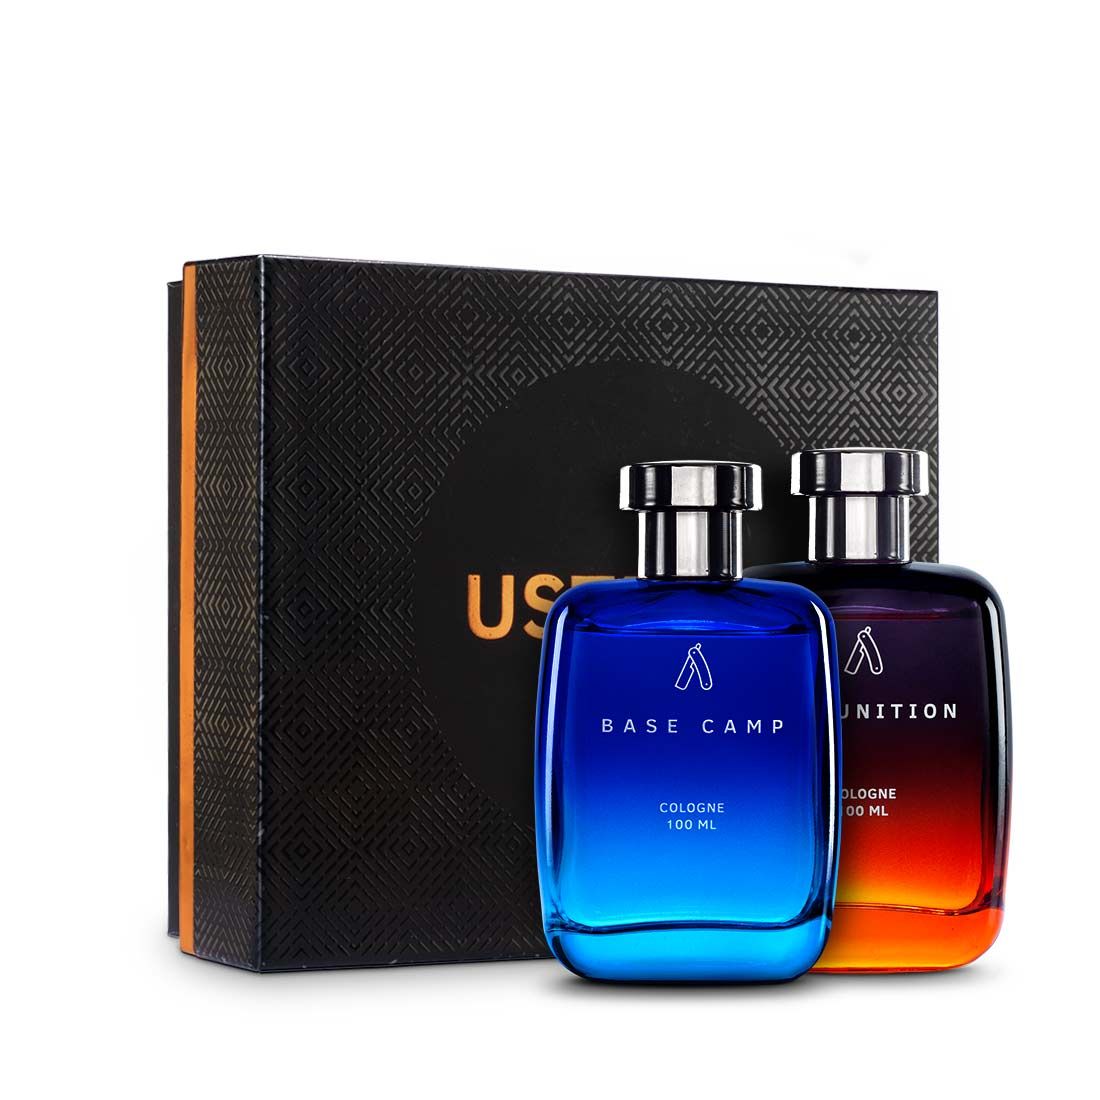 Ustraa Cologne Ammunition & Base CampPerfume For Men With Gift Box